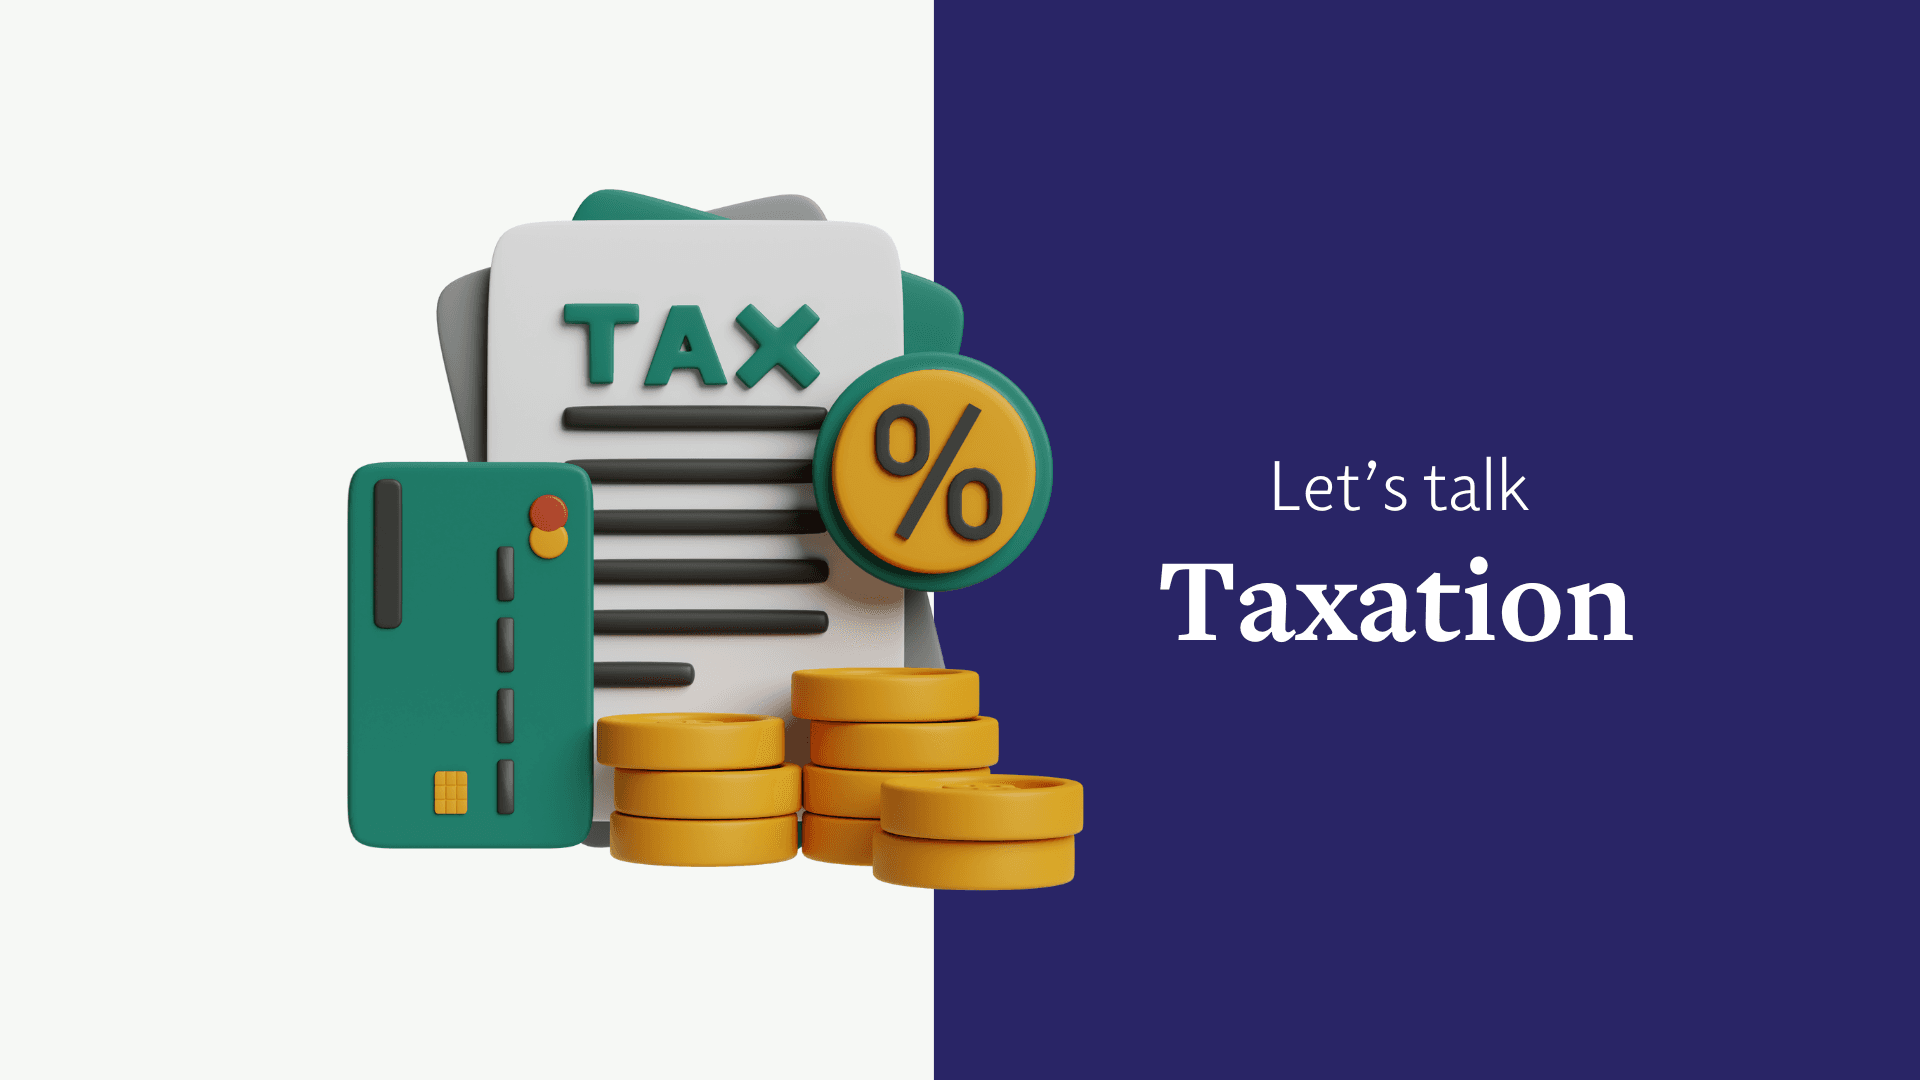 How are investments taxed in Switzerland?